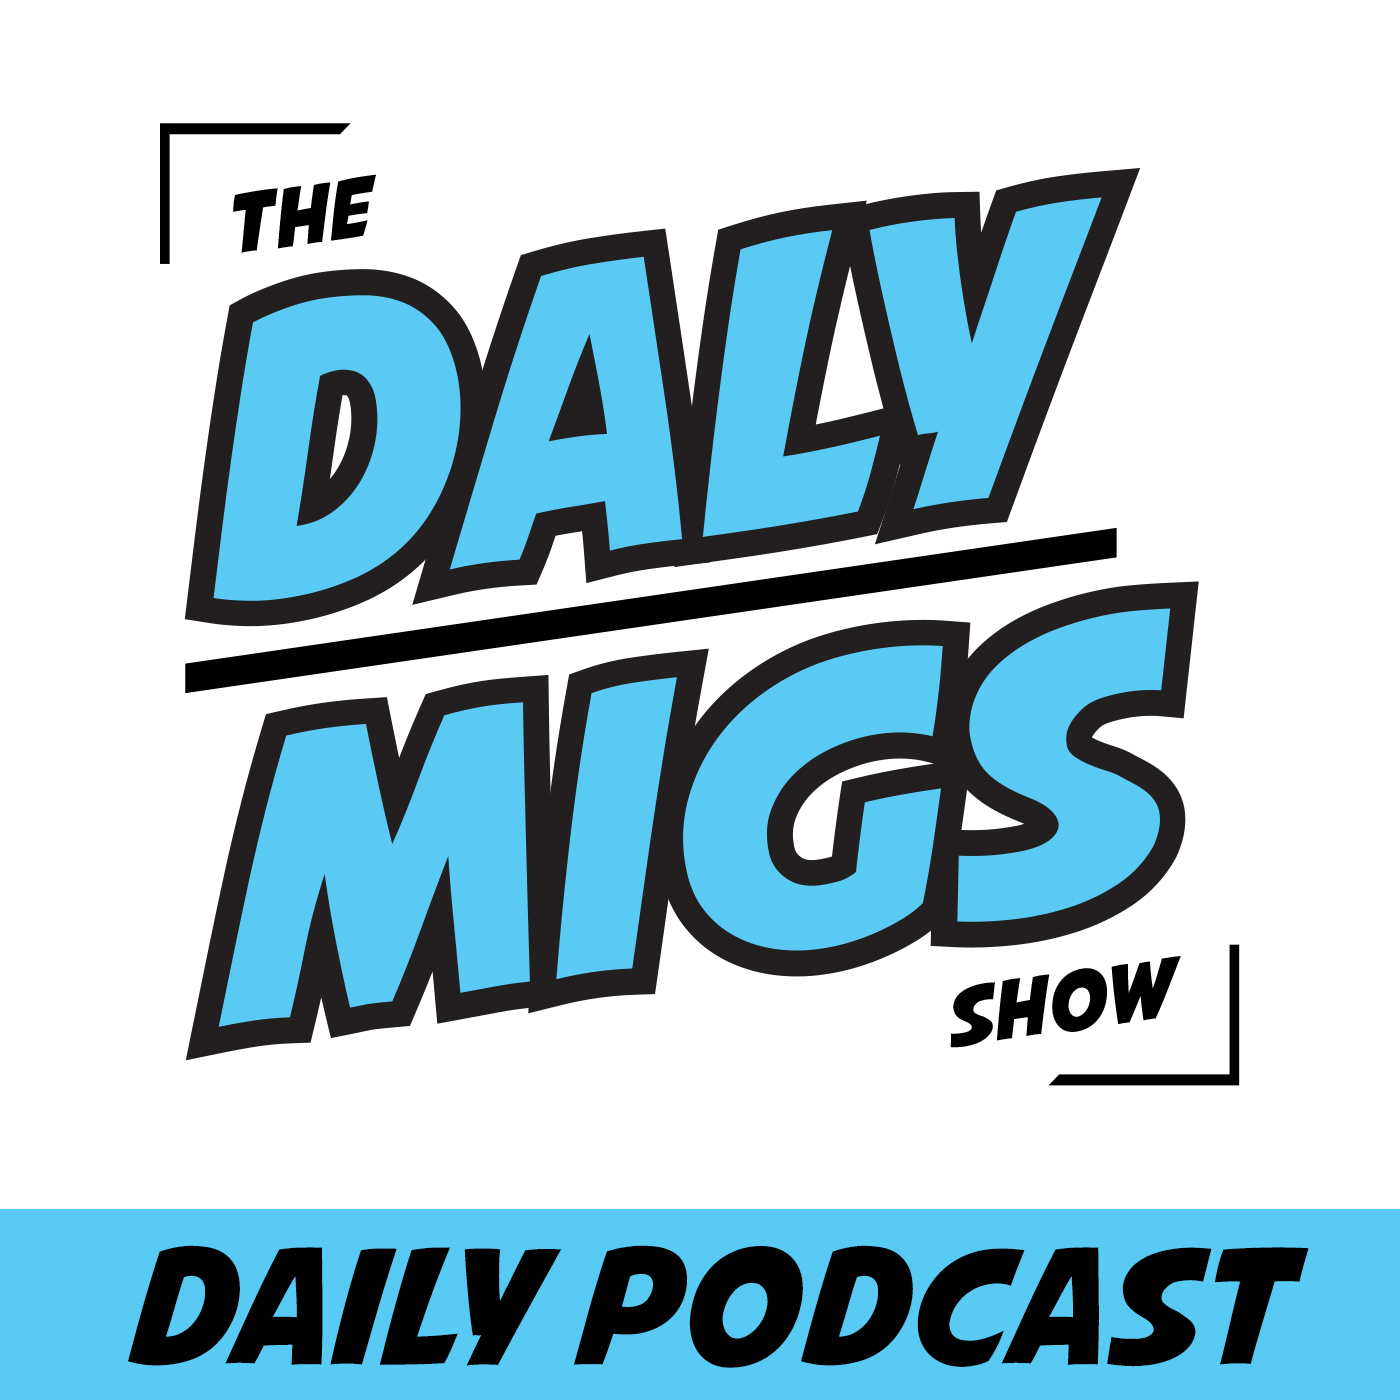 Daily Podcast pt. 4 - "Chris Egan from King 5 joins us from Paris!"